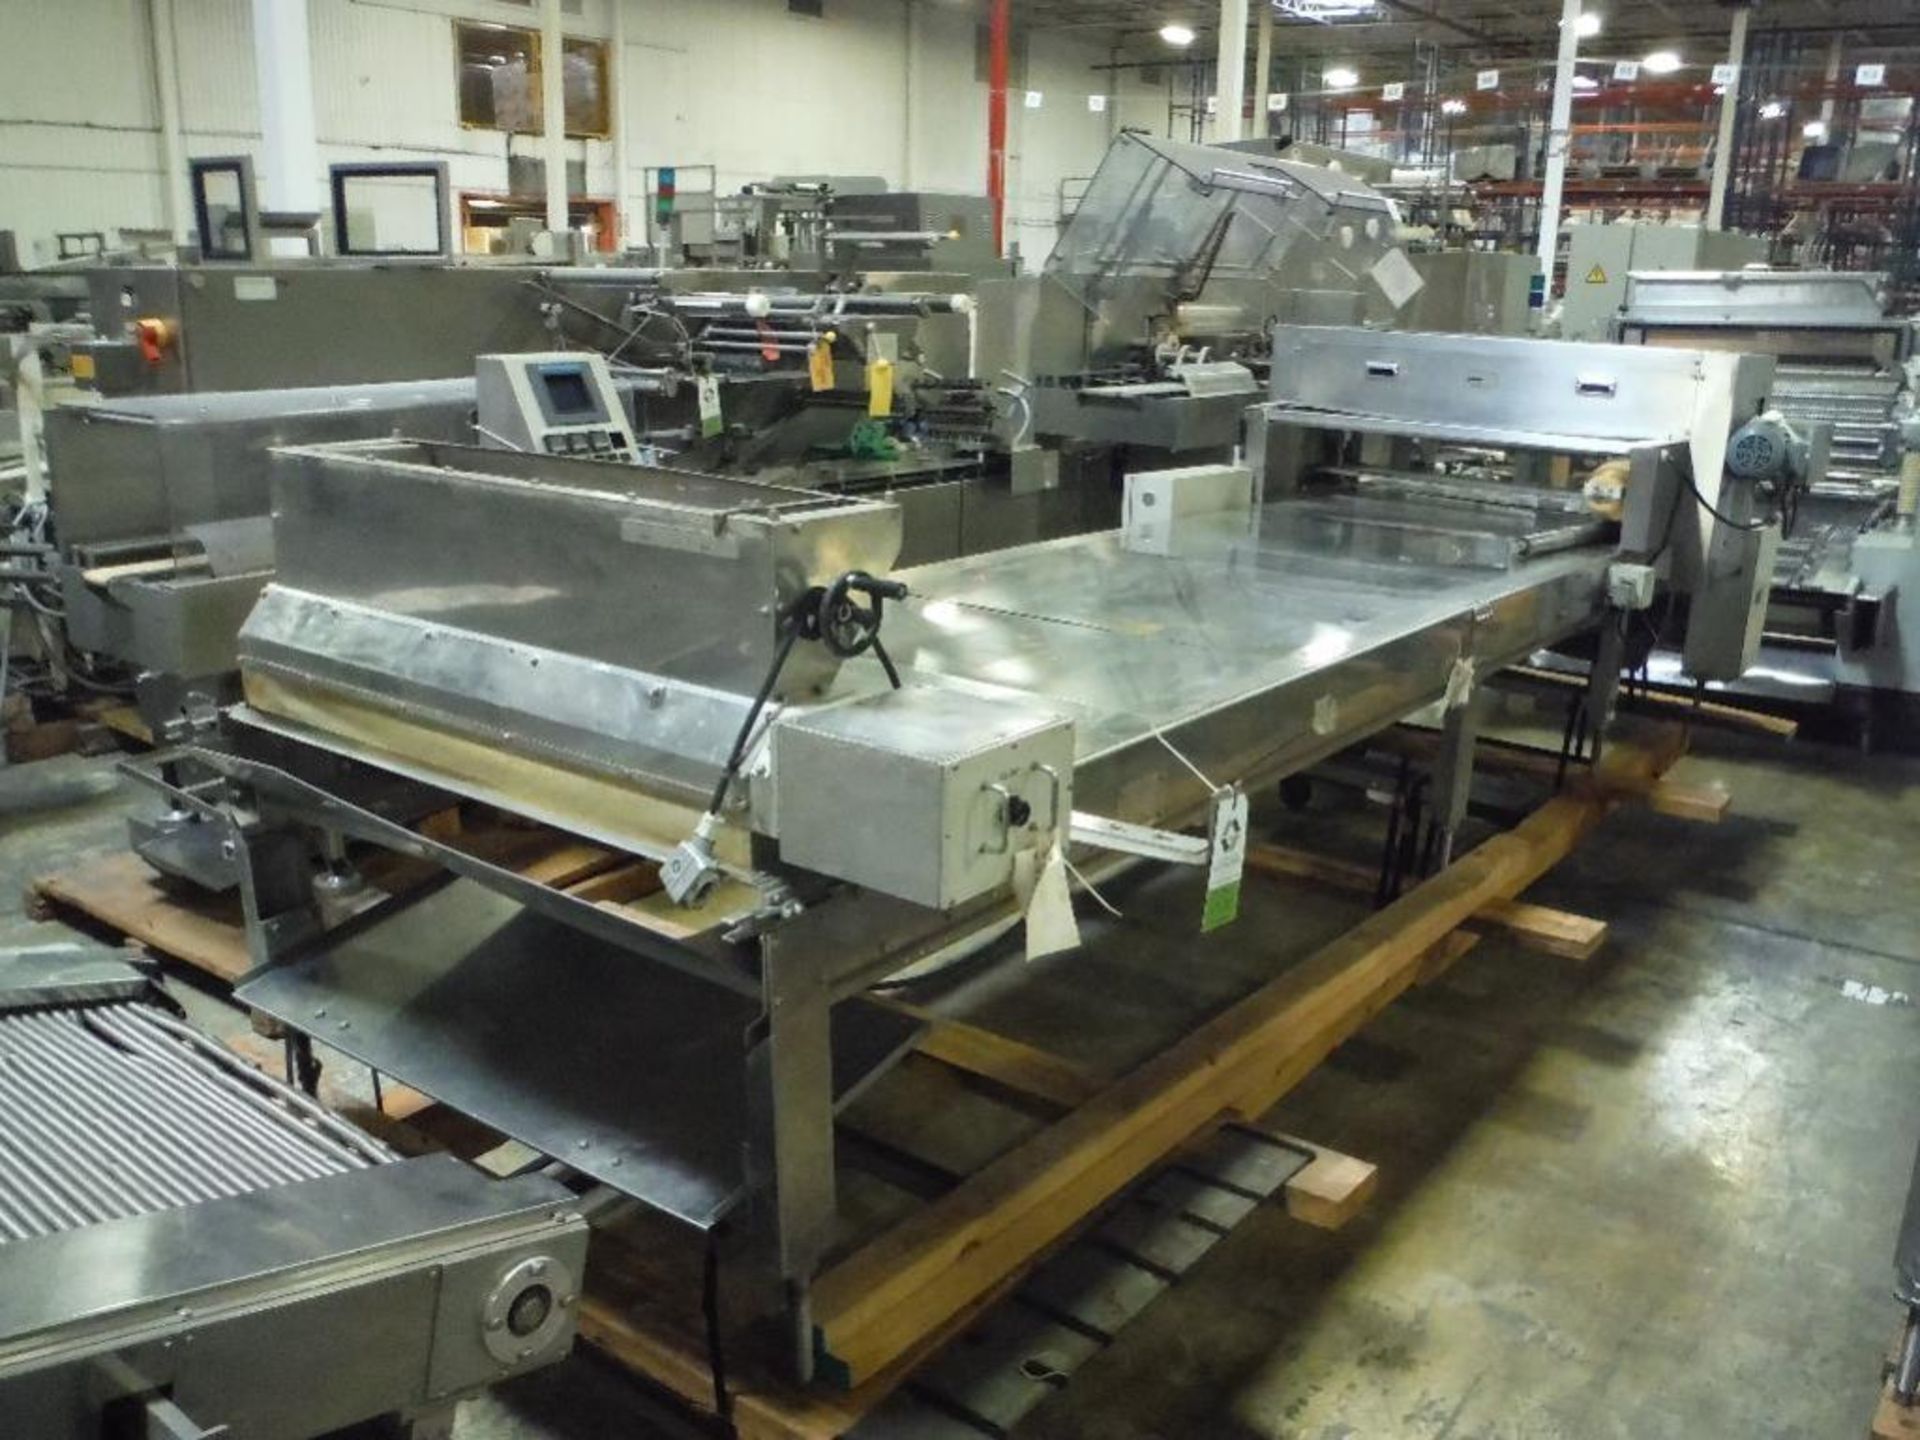 1991 Rheon sheeting conveyor, Model PC213, SN 00011, 180 in. long x 42 in. wide, with 1991 Rheon dou - Image 2 of 16